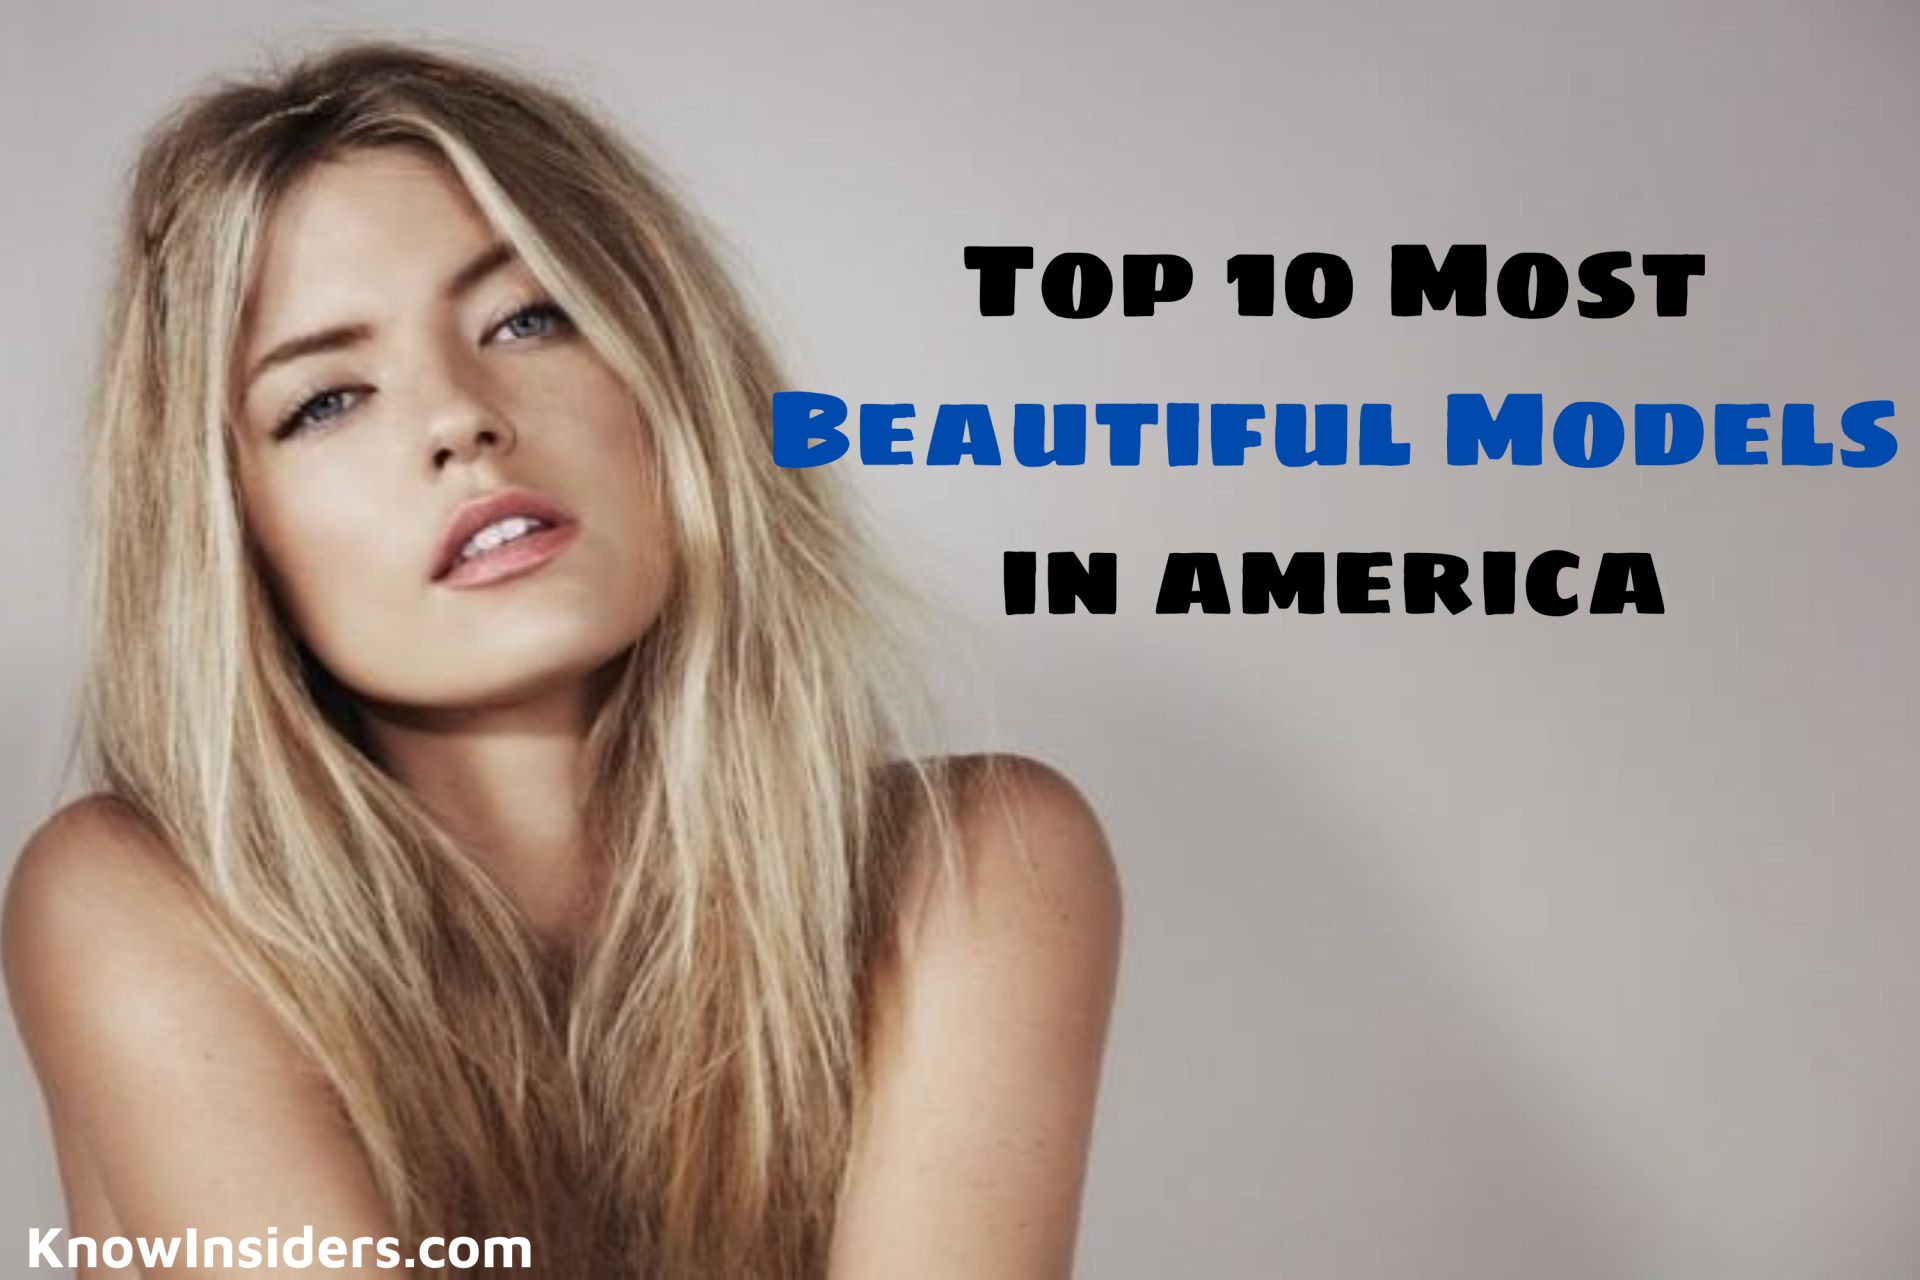 Top 10 Most Beautiful Models in America Today